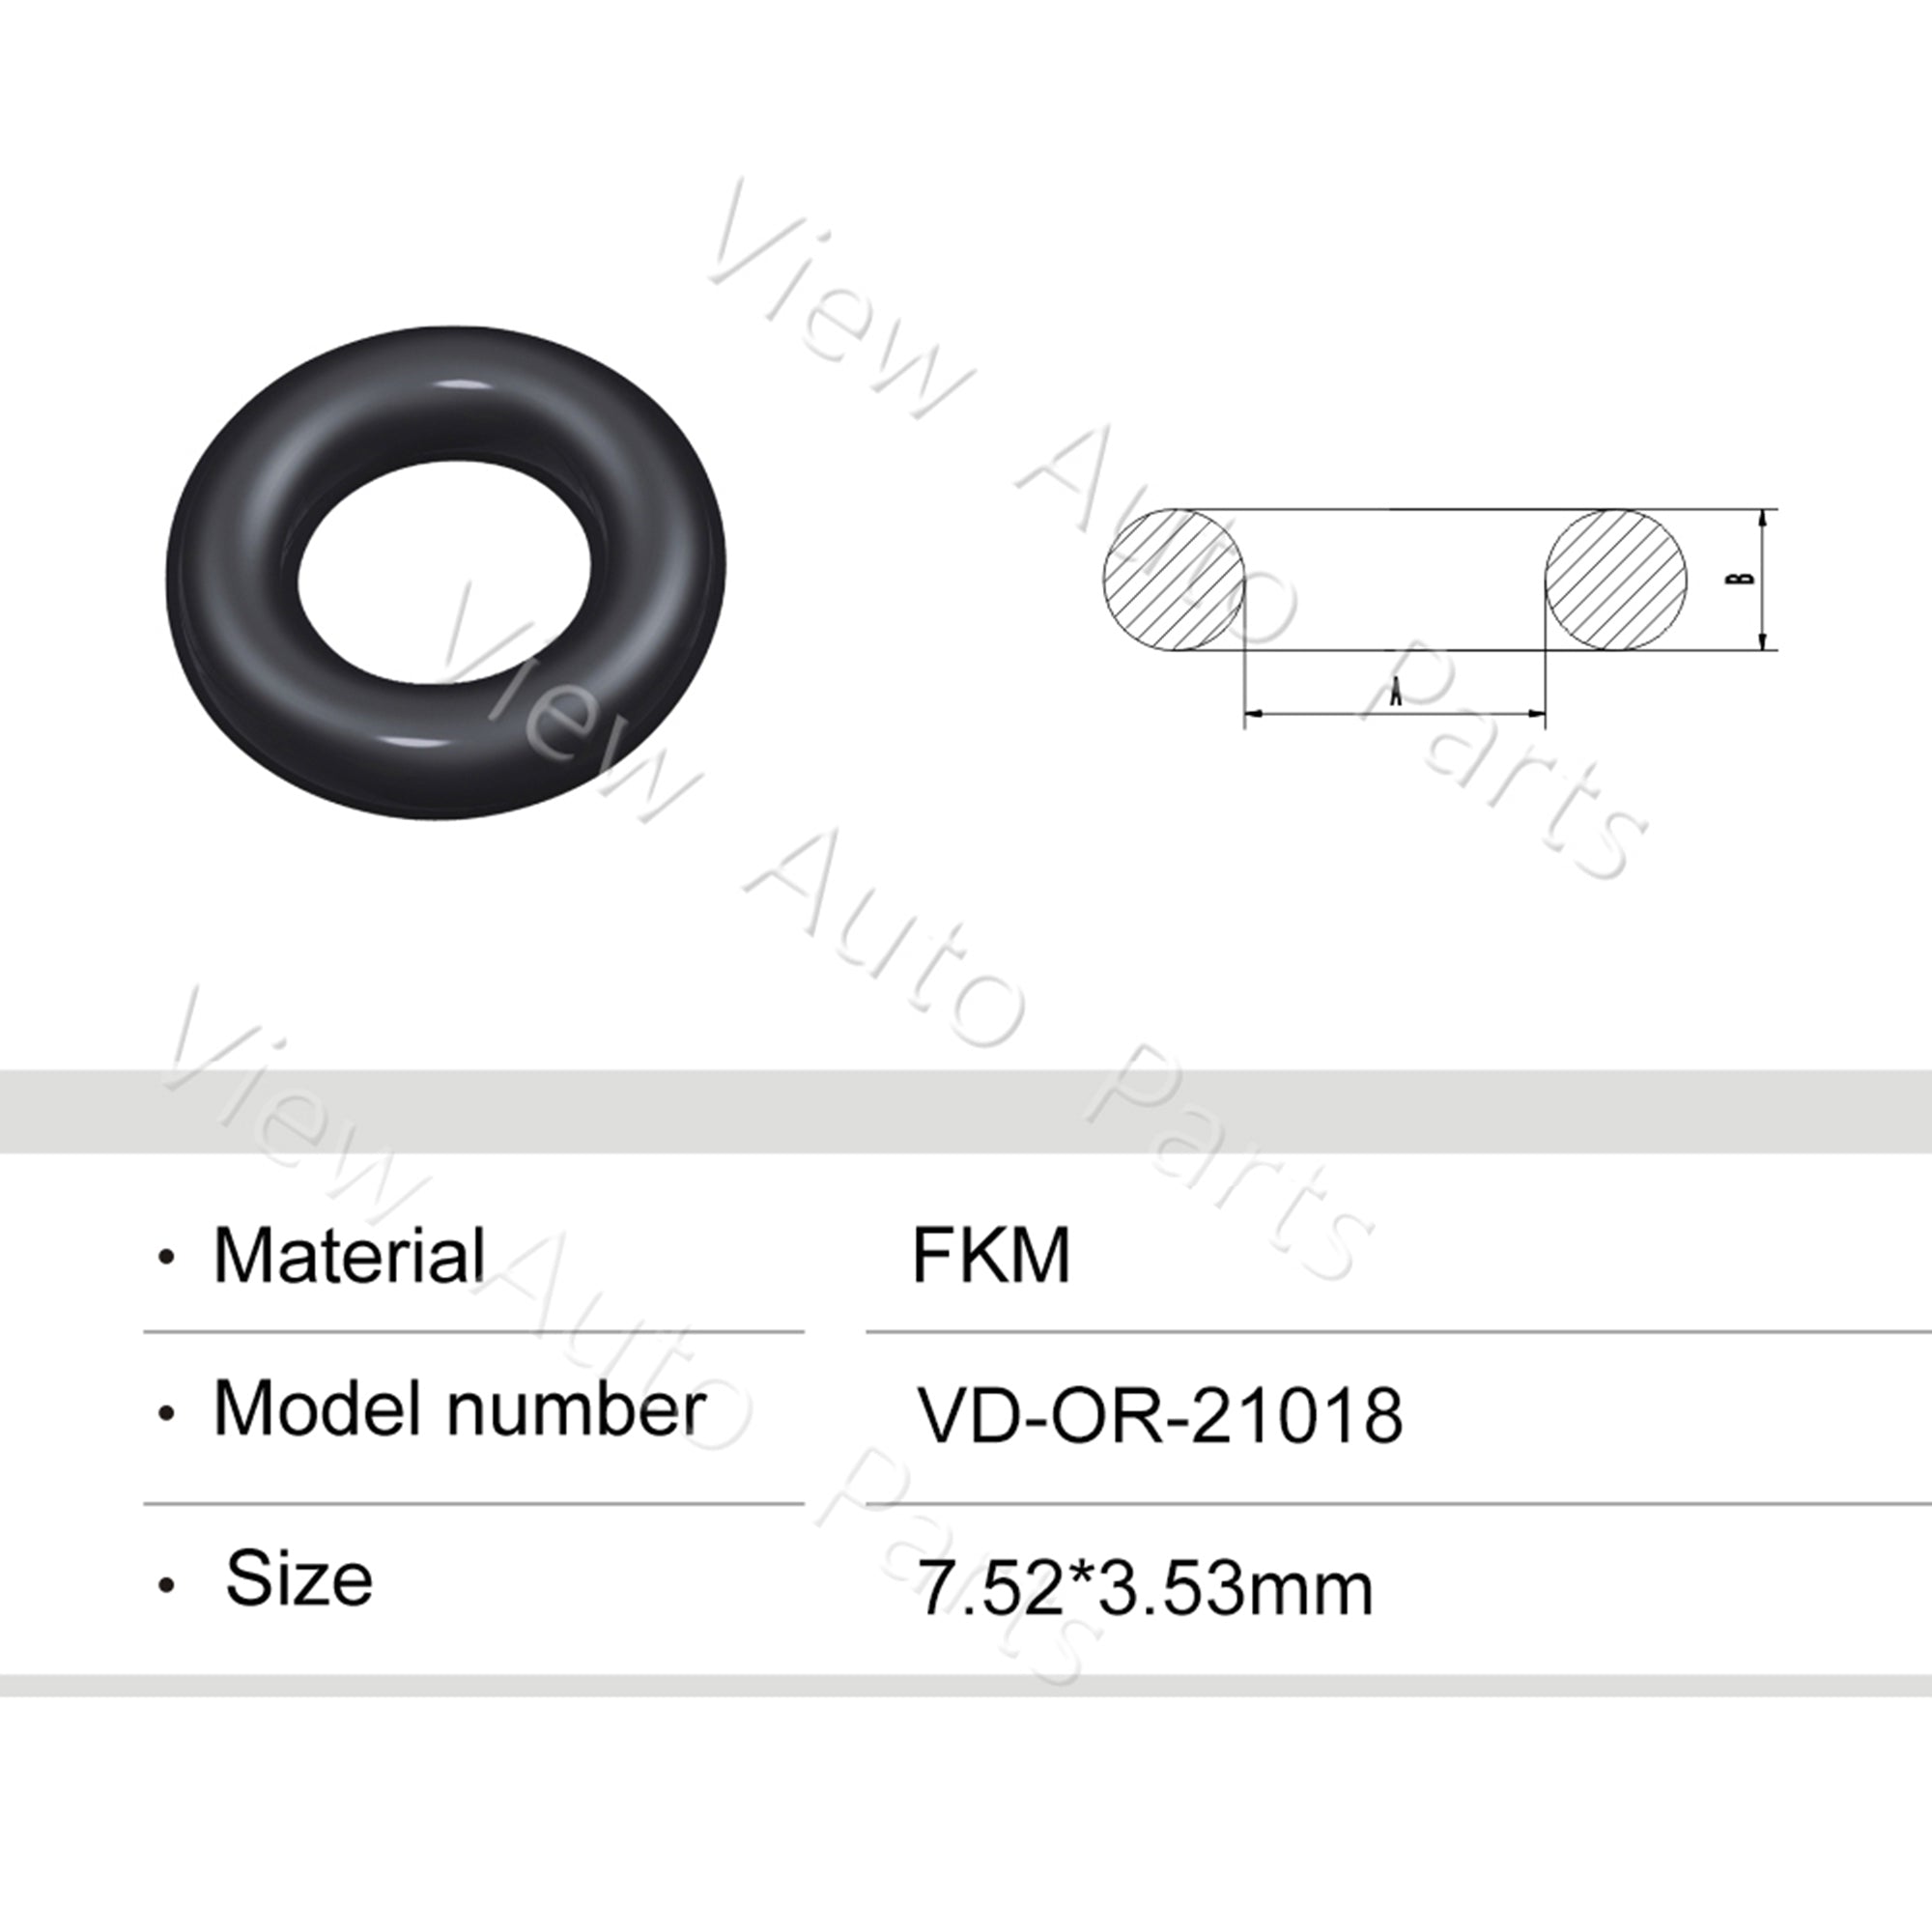 Fuel Injector Rubber Seal Orings for GB3-100 ASNU08C Universal Fuel Injector Repair Kits FKM& Rubber Heat Resistant, Size: 7.52*3.53mm OR-21018